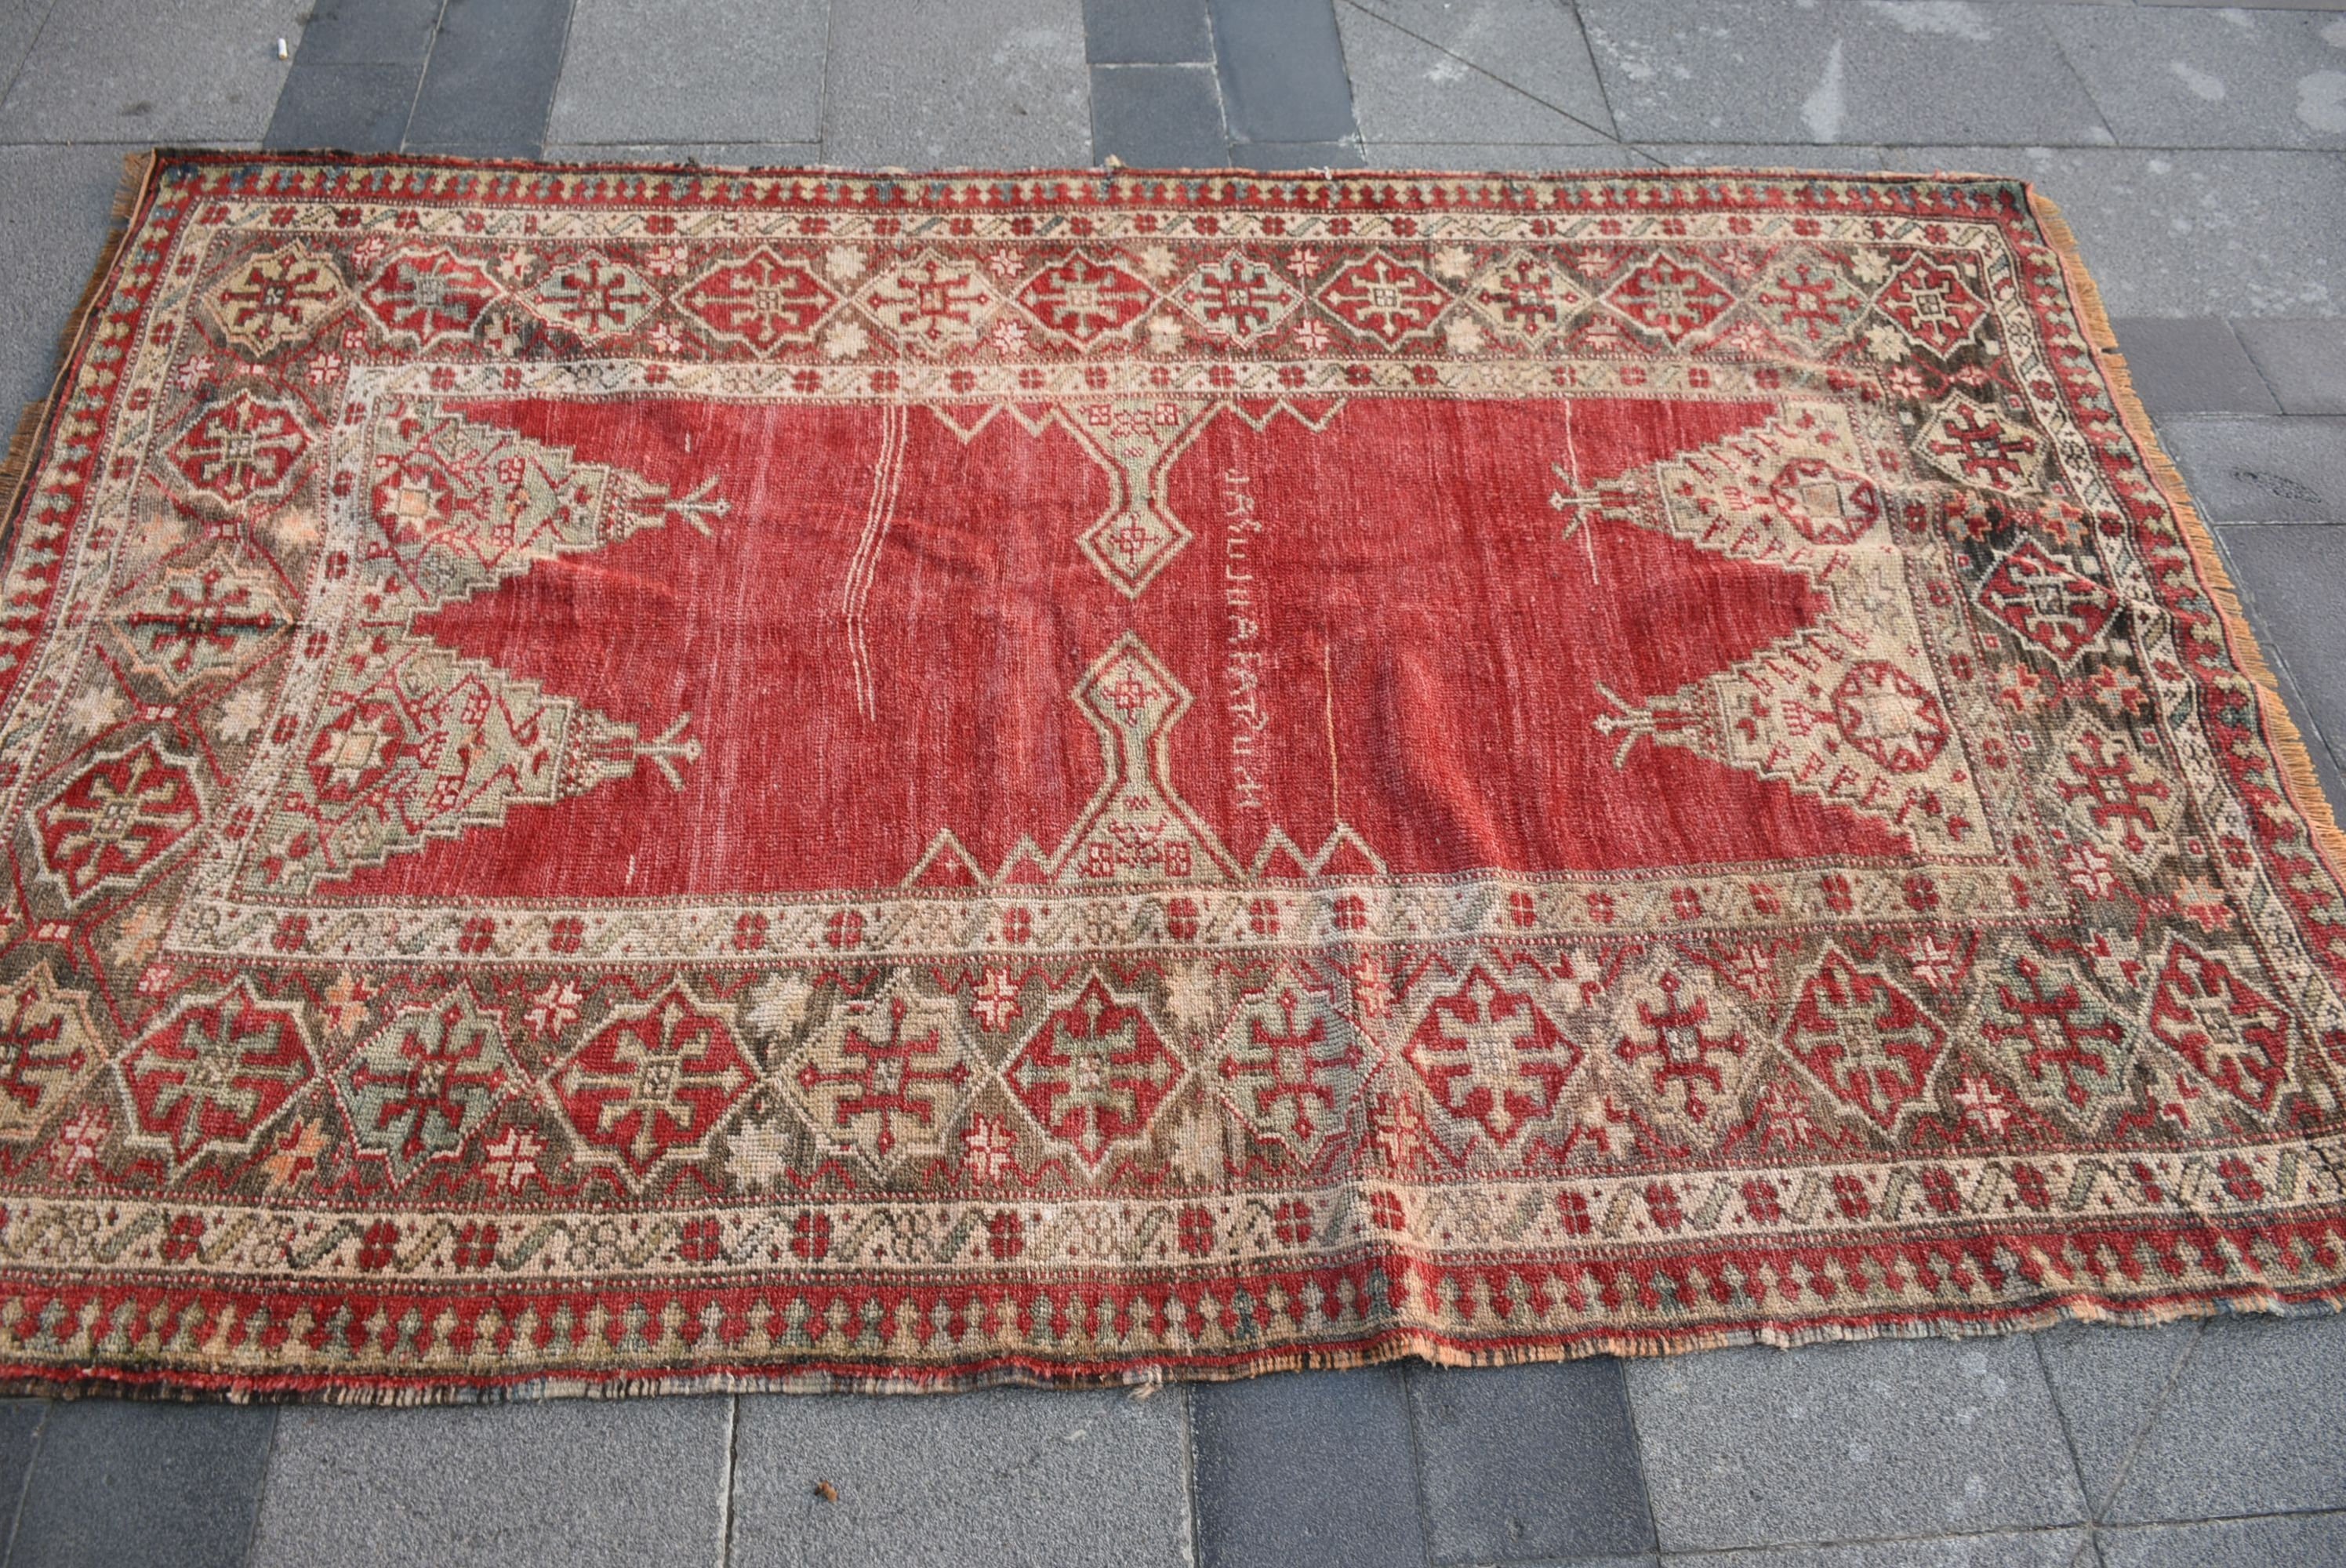 Anatolian Rug, Turkish Rugs, 4.2x6.7 ft Area Rug, Indoor Rugs, Home Decor Rug, Vintage Rug, Red Oriental Rug, Ethnic Rugs, Rugs for Kitchen